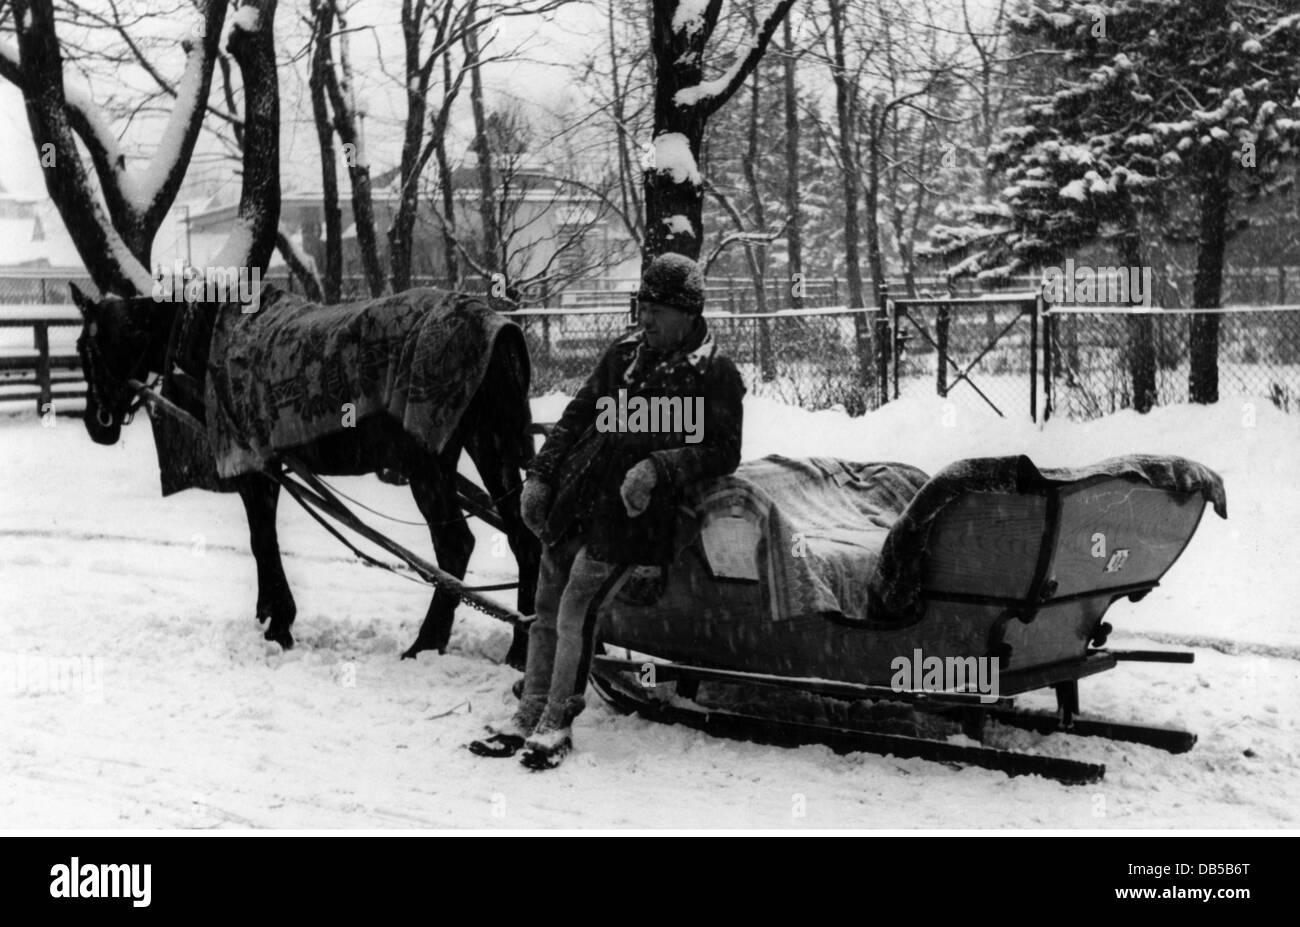 people, men, with animals, coachman with sleigh in Zakopane, Poland, 26.12.1941, Additional-Rights-Clearences-Not Available Stock Photo